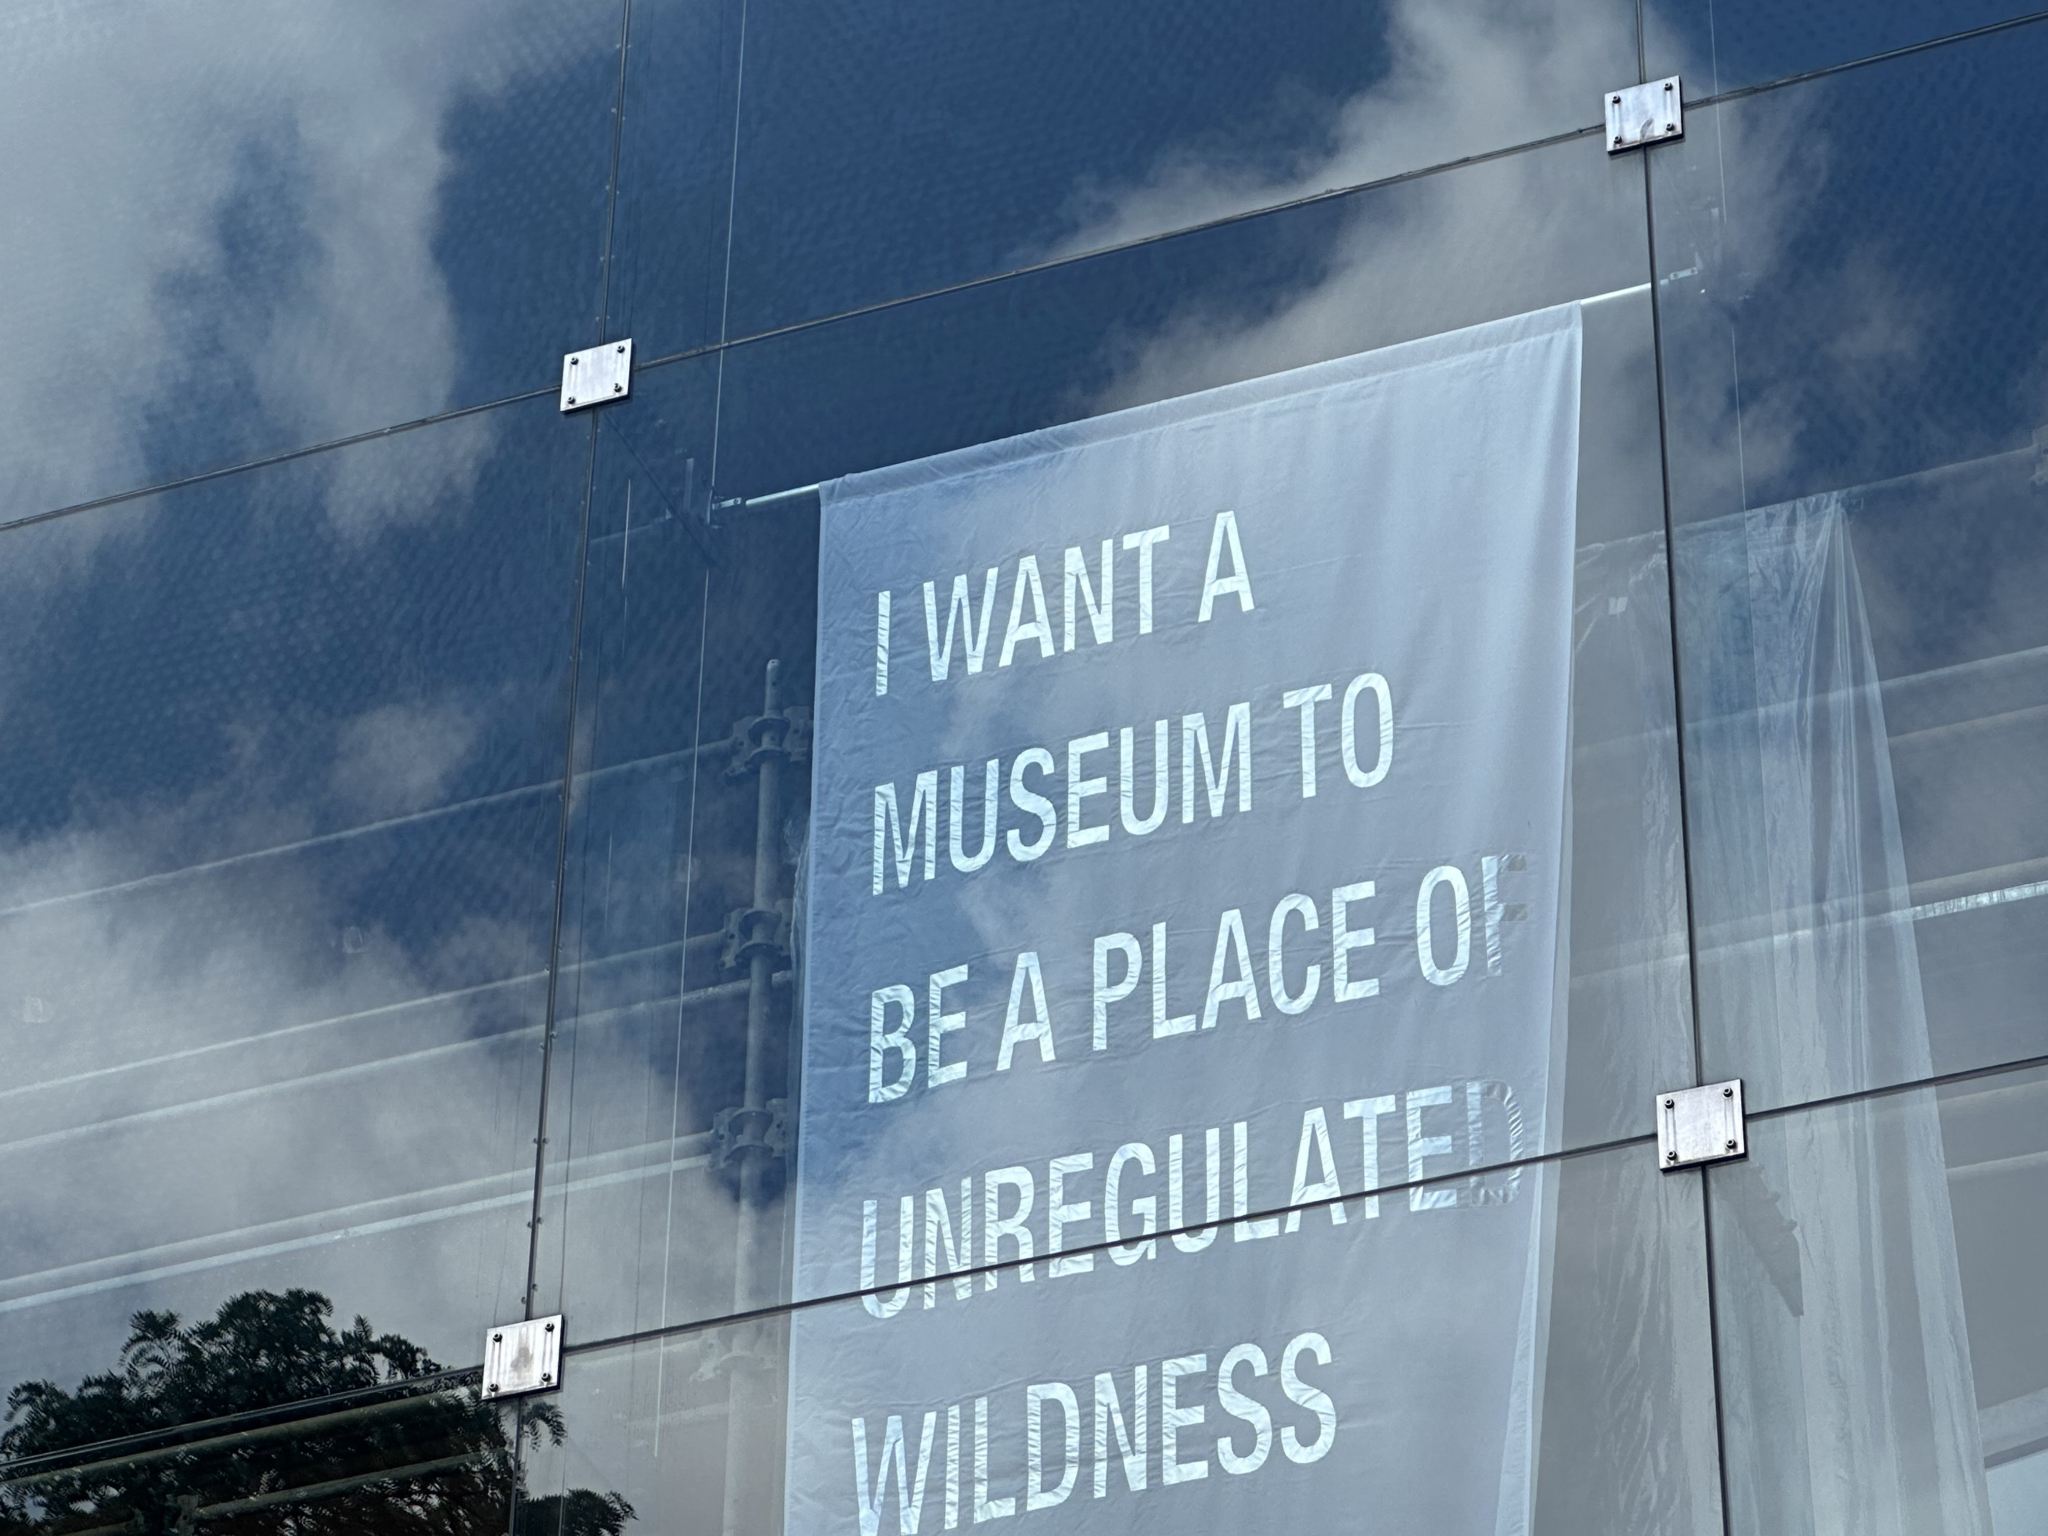 a banner in a windo that reads "I want a museum to be a place of unregulated wilderness"